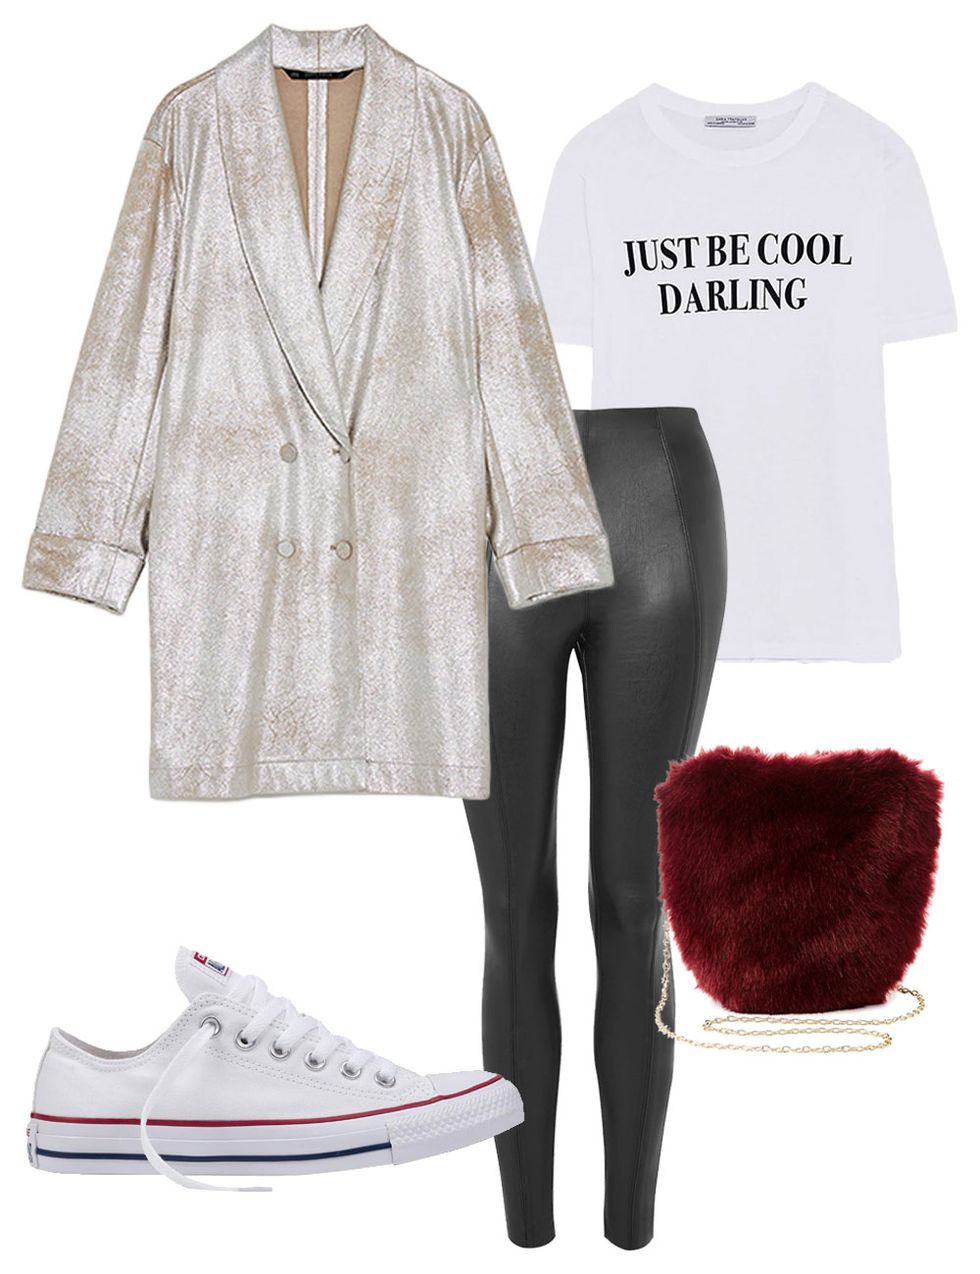 New Years Eve Looks - Converse Outfits for New Years Eve